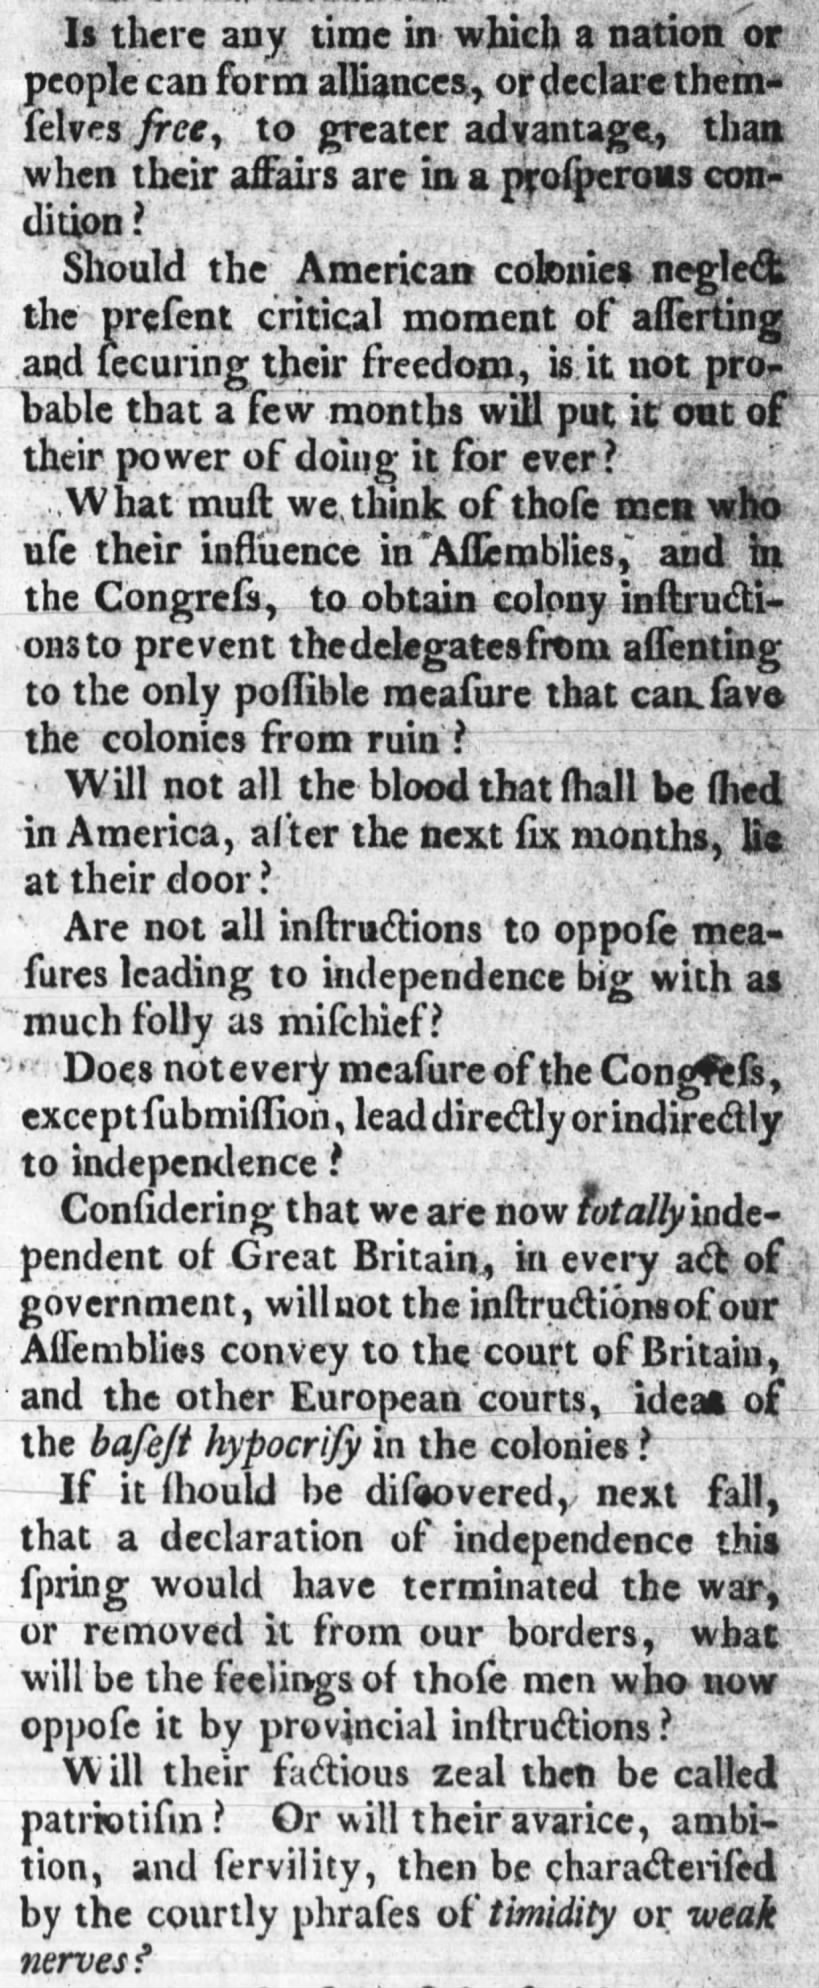 Opinion that American colonies should declare independence immediately, May 1776